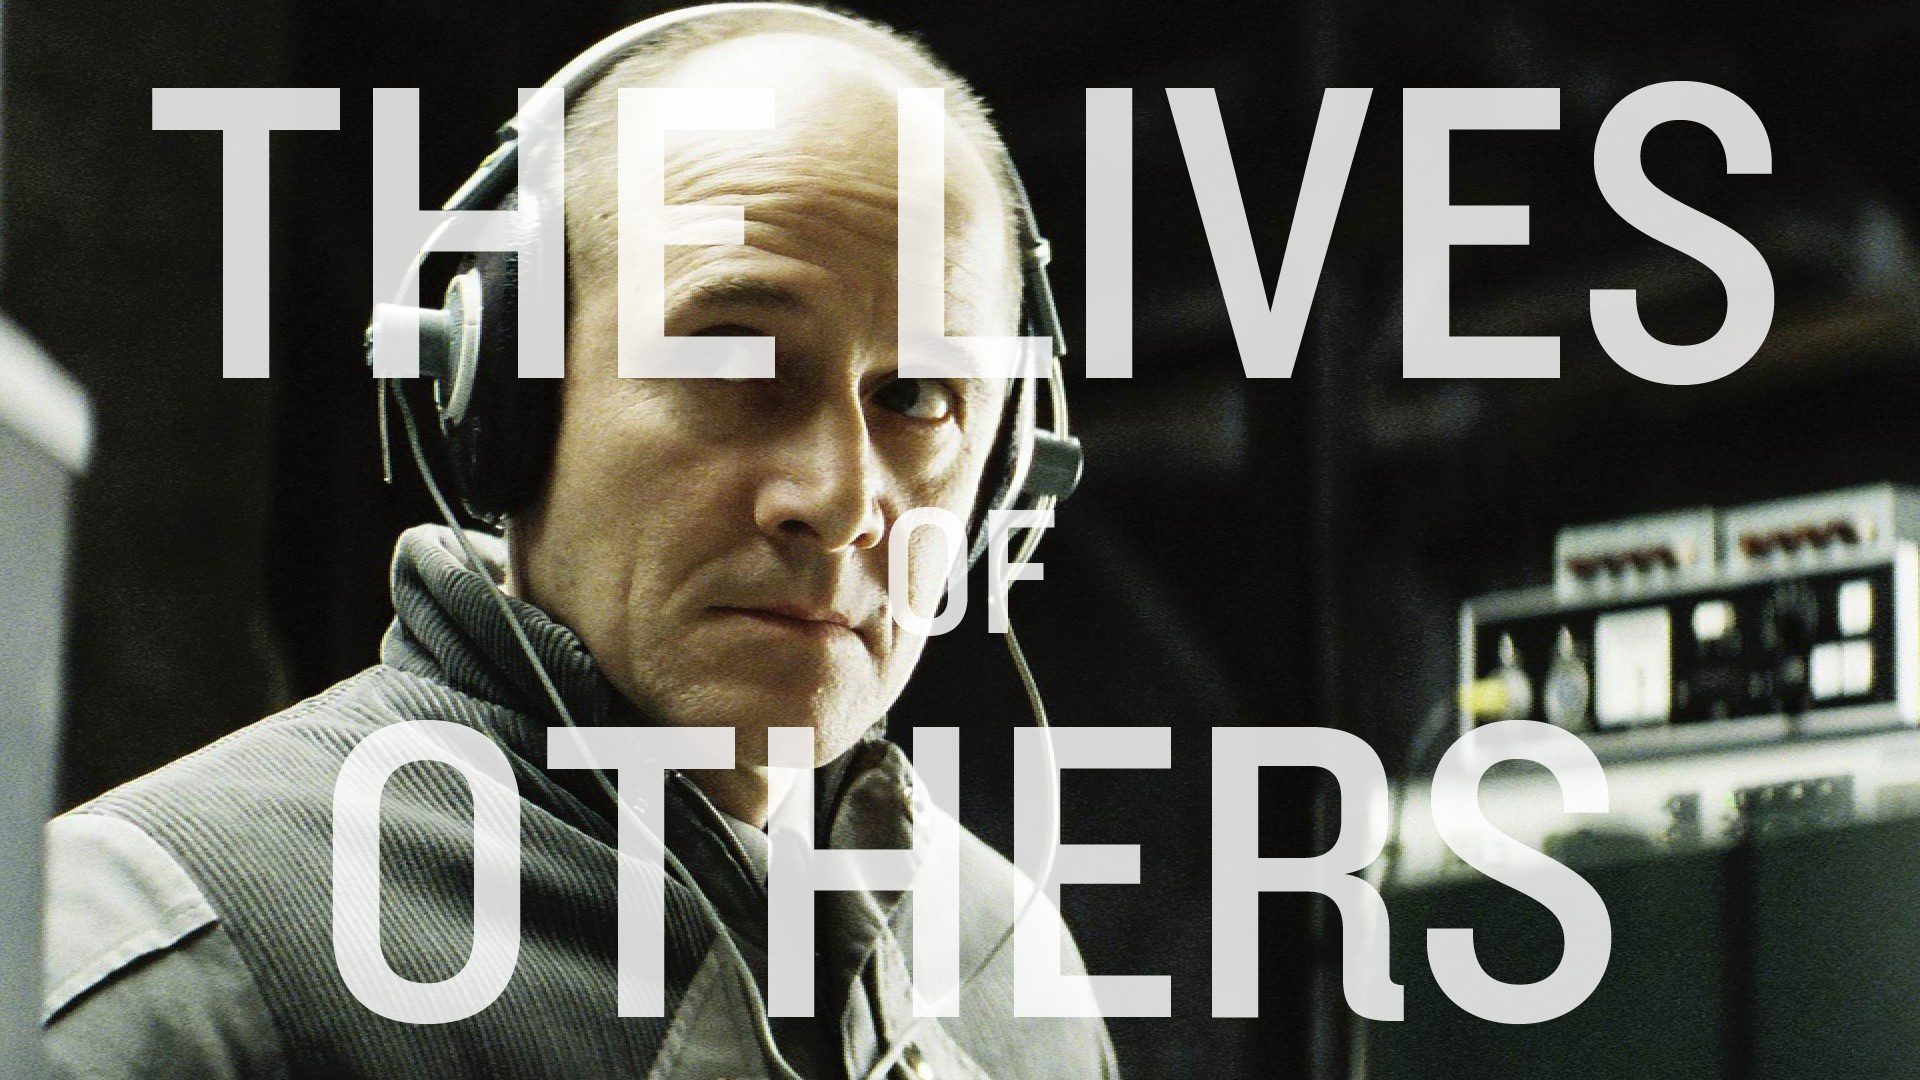 The Lives Of Others HD wallpapers, Desktop wallpaper - most viewed